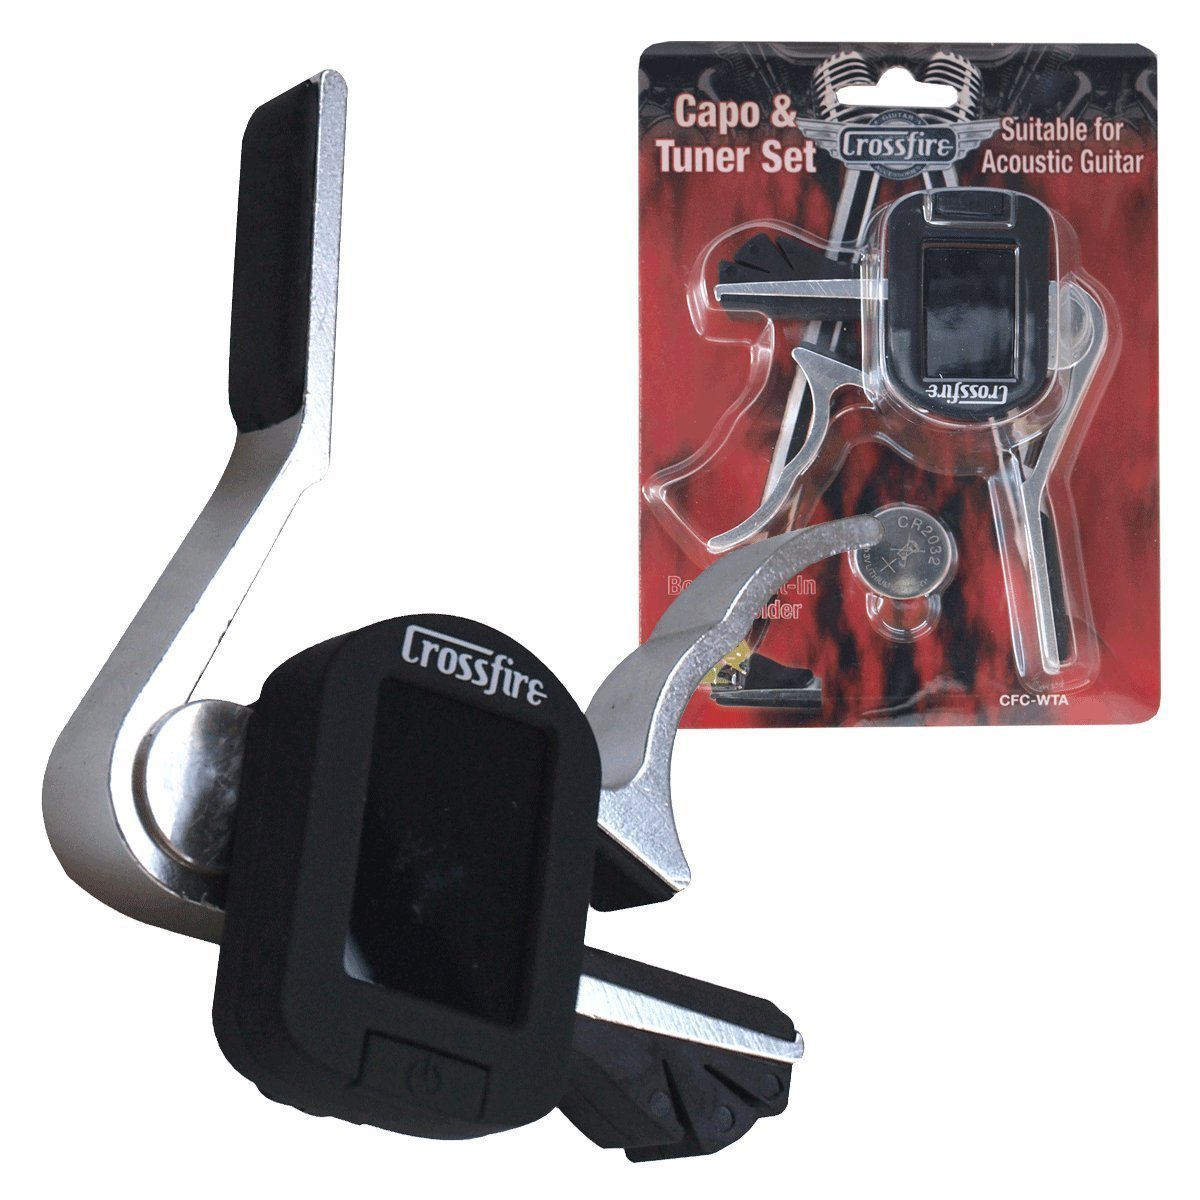 Crossfire Trigger-Style Acoustic Guitar Capo with Chromatic Tuner (Nickel)-CFC-WTA